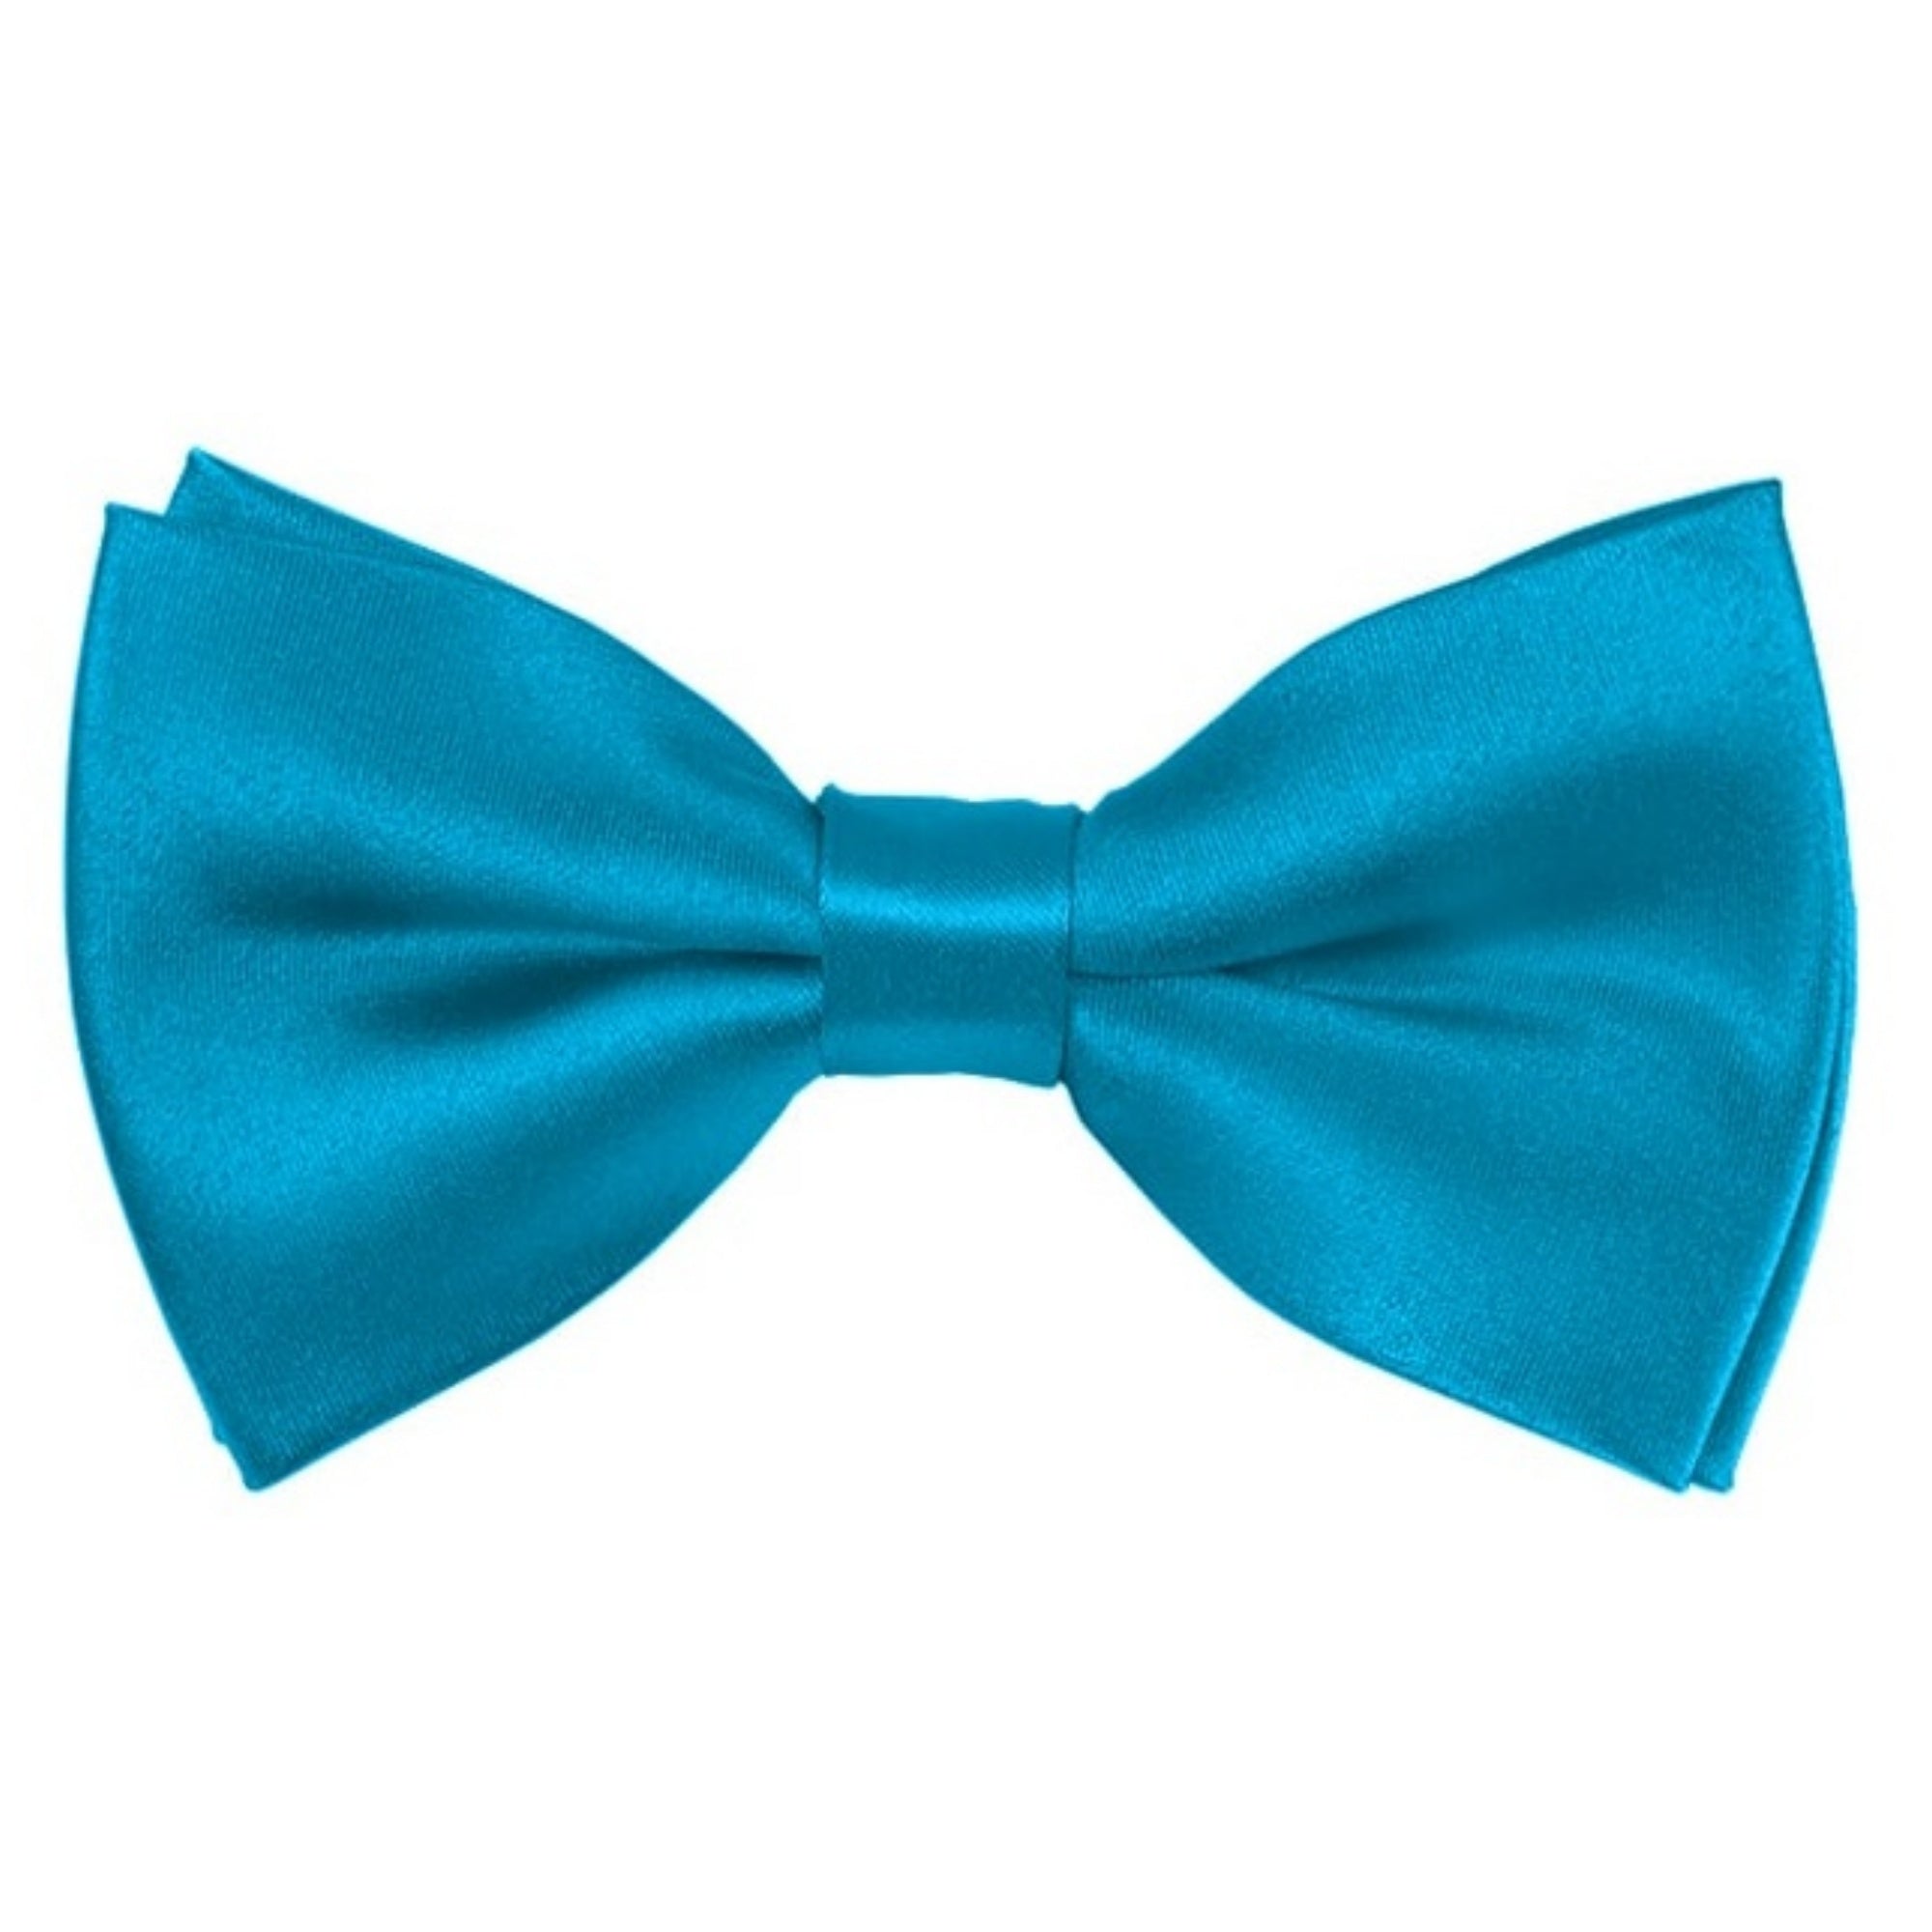 TheDapperTie Men's Solid Color 2.5 W And 4.5 L Inch Pre-Tied adjustable Bow Ties Men's Solid Color Bow Tie TheDapperTie Turquoise Blue  